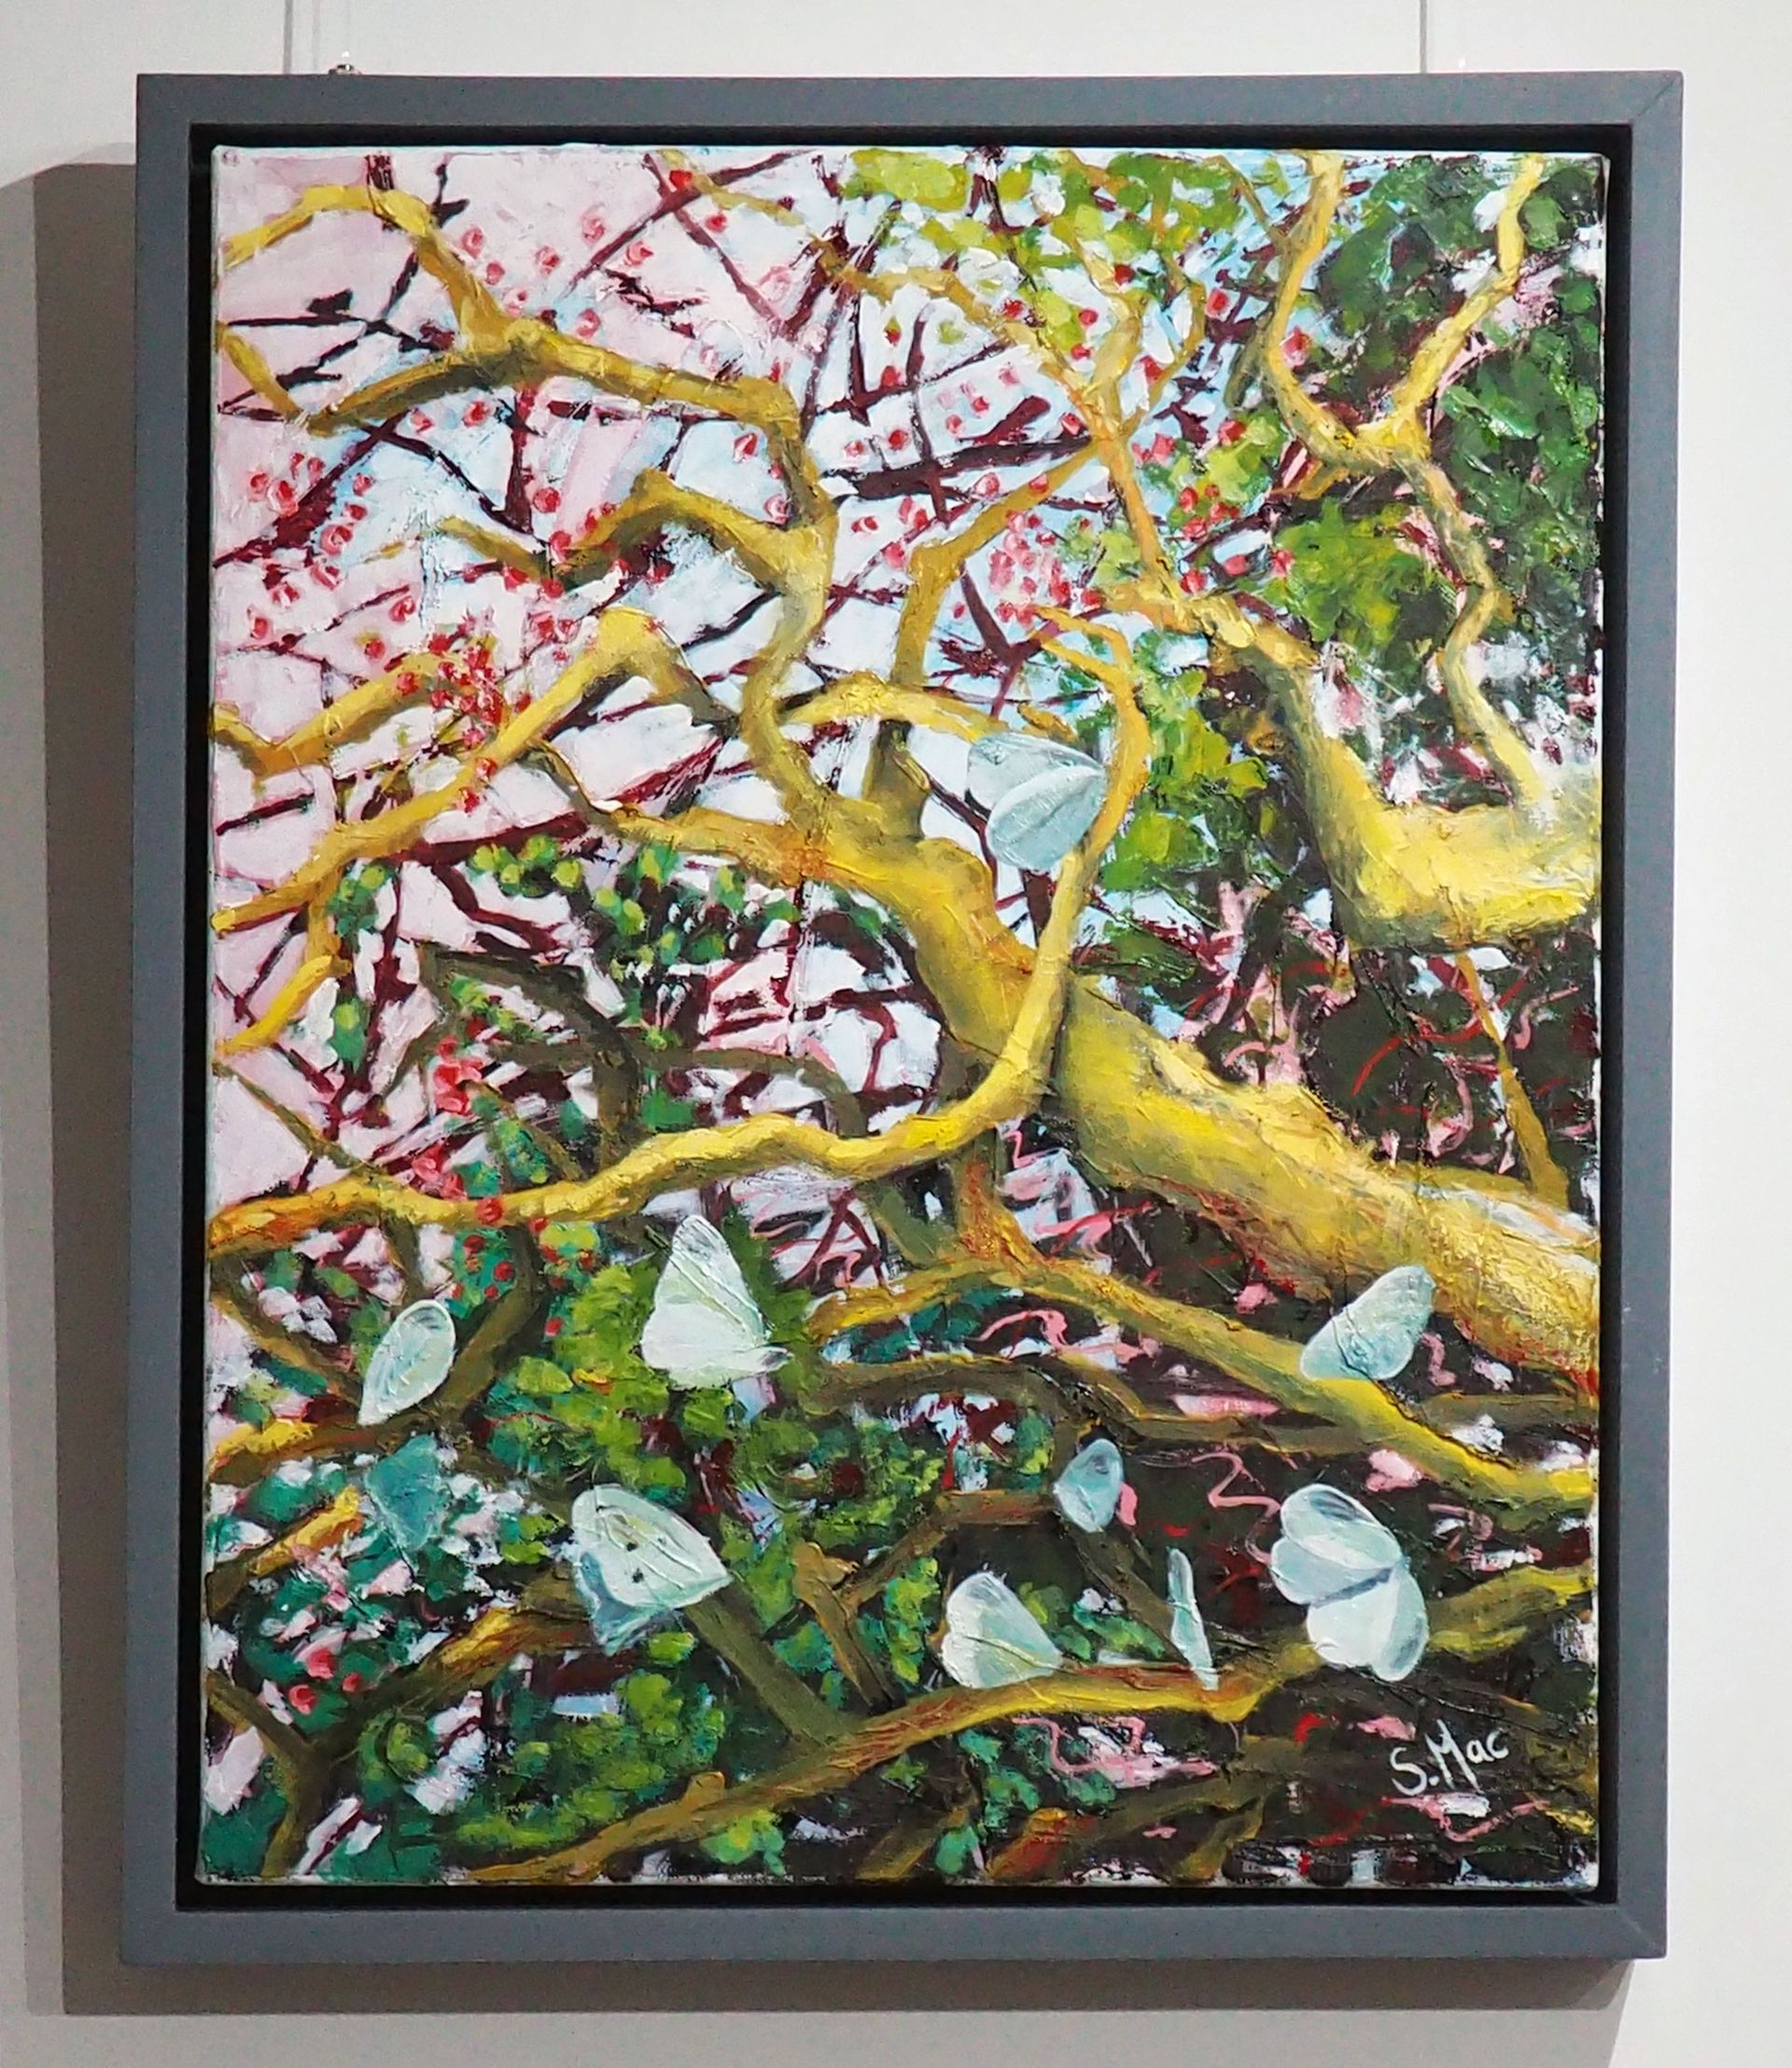 A portrait orientated painting of branches with around a dozen pale grey / green butterflies. The branches in the foreground are an ochre glow. Towards the bottom half and top right there is forest and acid green foliage, and the butterflies are place in various positions of wings open and closed. In the top left there is light blue and light pink sky showing red pink berries on the bare branches. Framed in a simple grey wood.